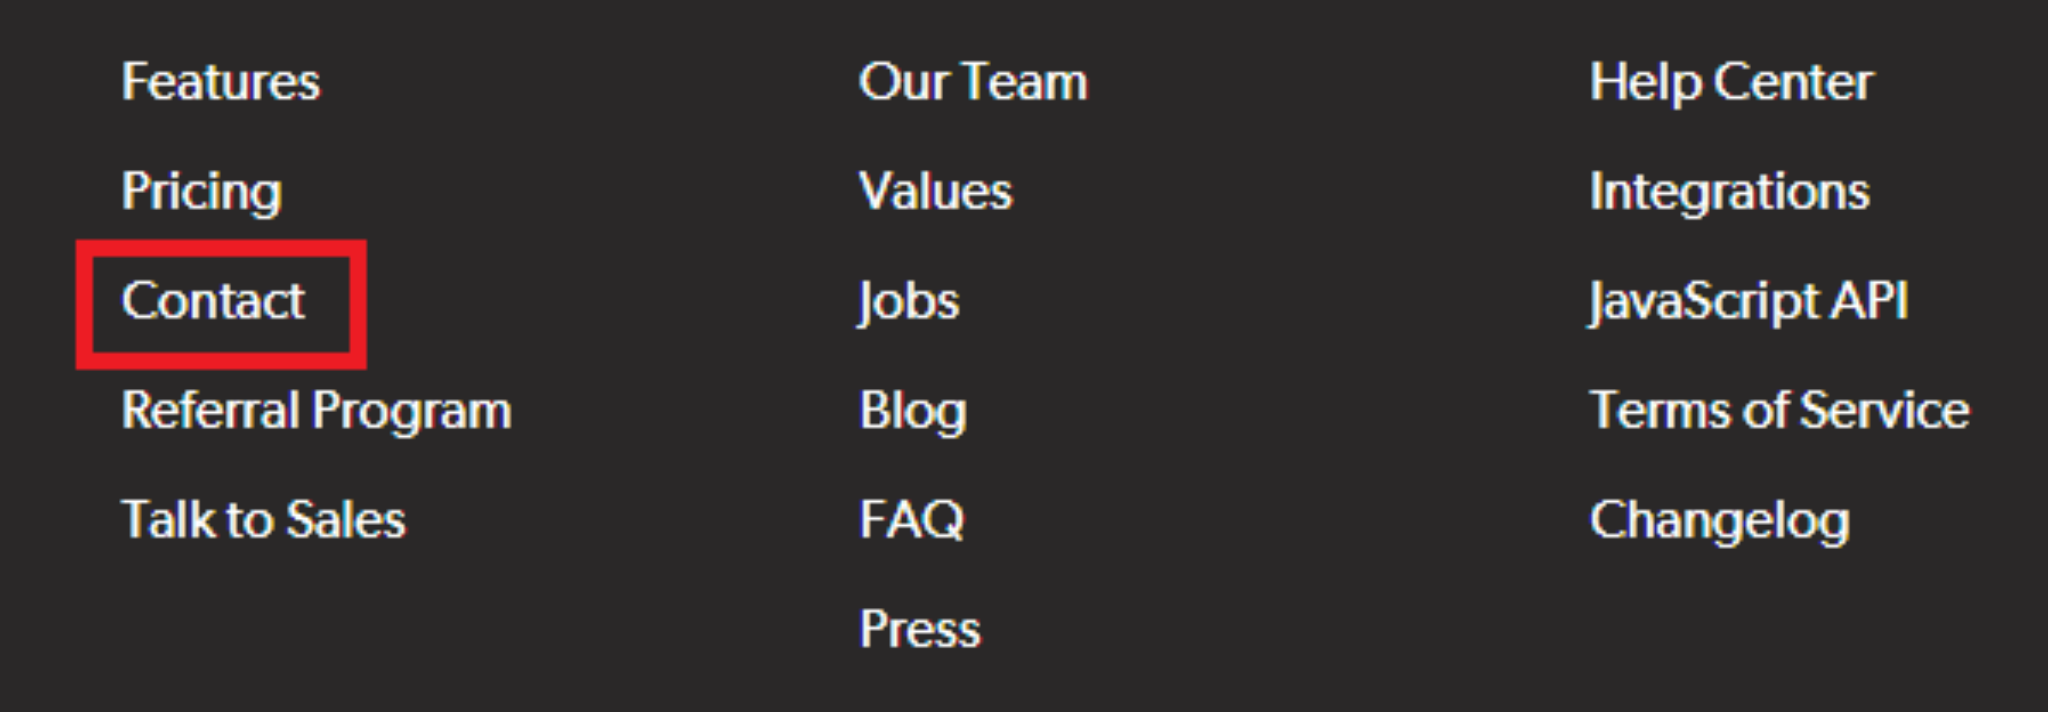 Sample footer menu with only place to Contact